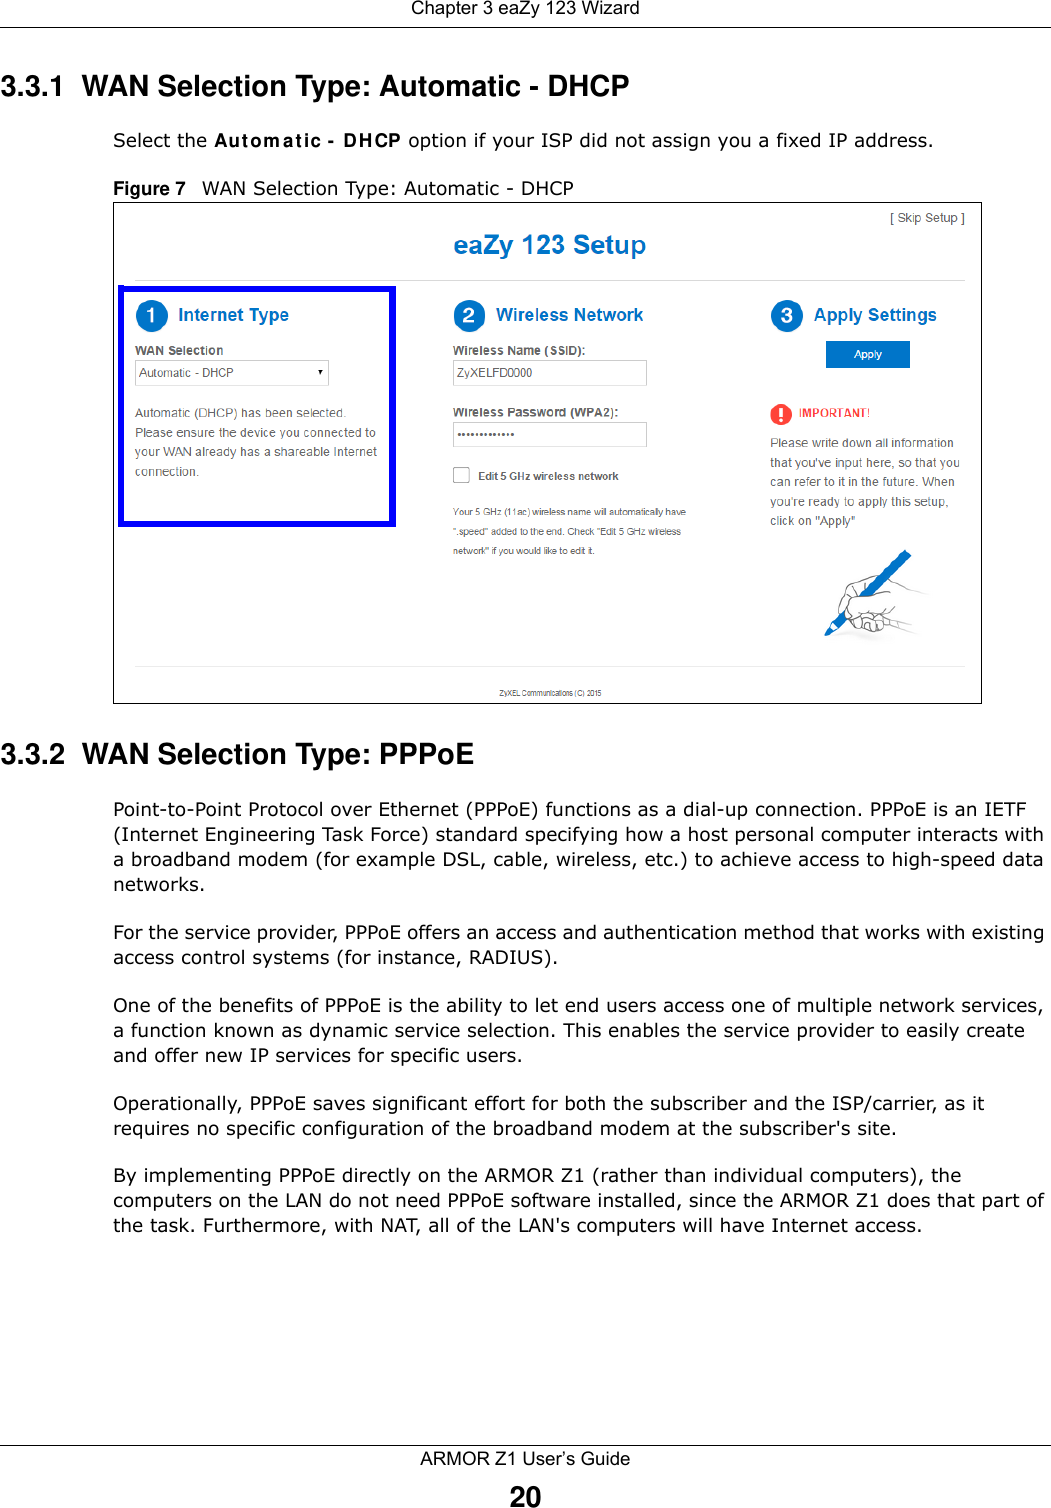 Chapter 3 eaZy 123 WizardARMOR Z1 User’s Guide203.3.1  WAN Selection Type: Automatic - DHCPSelect the Automatic - DHCP option if your ISP did not assign you a fixed IP address.Figure 7   WAN Selection Type: Automatic - DHCP3.3.2  WAN Selection Type: PPPoEPoint-to-Point Protocol over Ethernet (PPPoE) functions as a dial-up connection. PPPoE is an IETF (Internet Engineering Task Force) standard specifying how a host personal computer interacts with a broadband modem (for example DSL, cable, wireless, etc.) to achieve access to high-speed data networks.For the service provider, PPPoE offers an access and authentication method that works with existing access control systems (for instance, RADIUS). One of the benefits of PPPoE is the ability to let end users access one of multiple network services, a function known as dynamic service selection. This enables the service provider to easily create and offer new IP services for specific users.Operationally, PPPoE saves significant effort for both the subscriber and the ISP/carrier, as it requires no specific configuration of the broadband modem at the subscriber&apos;s site.By implementing PPPoE directly on the ARMOR Z1 (rather than individual computers), the computers on the LAN do not need PPPoE software installed, since the ARMOR Z1 does that part of the task. Furthermore, with NAT, all of the LAN&apos;s computers will have Internet access.